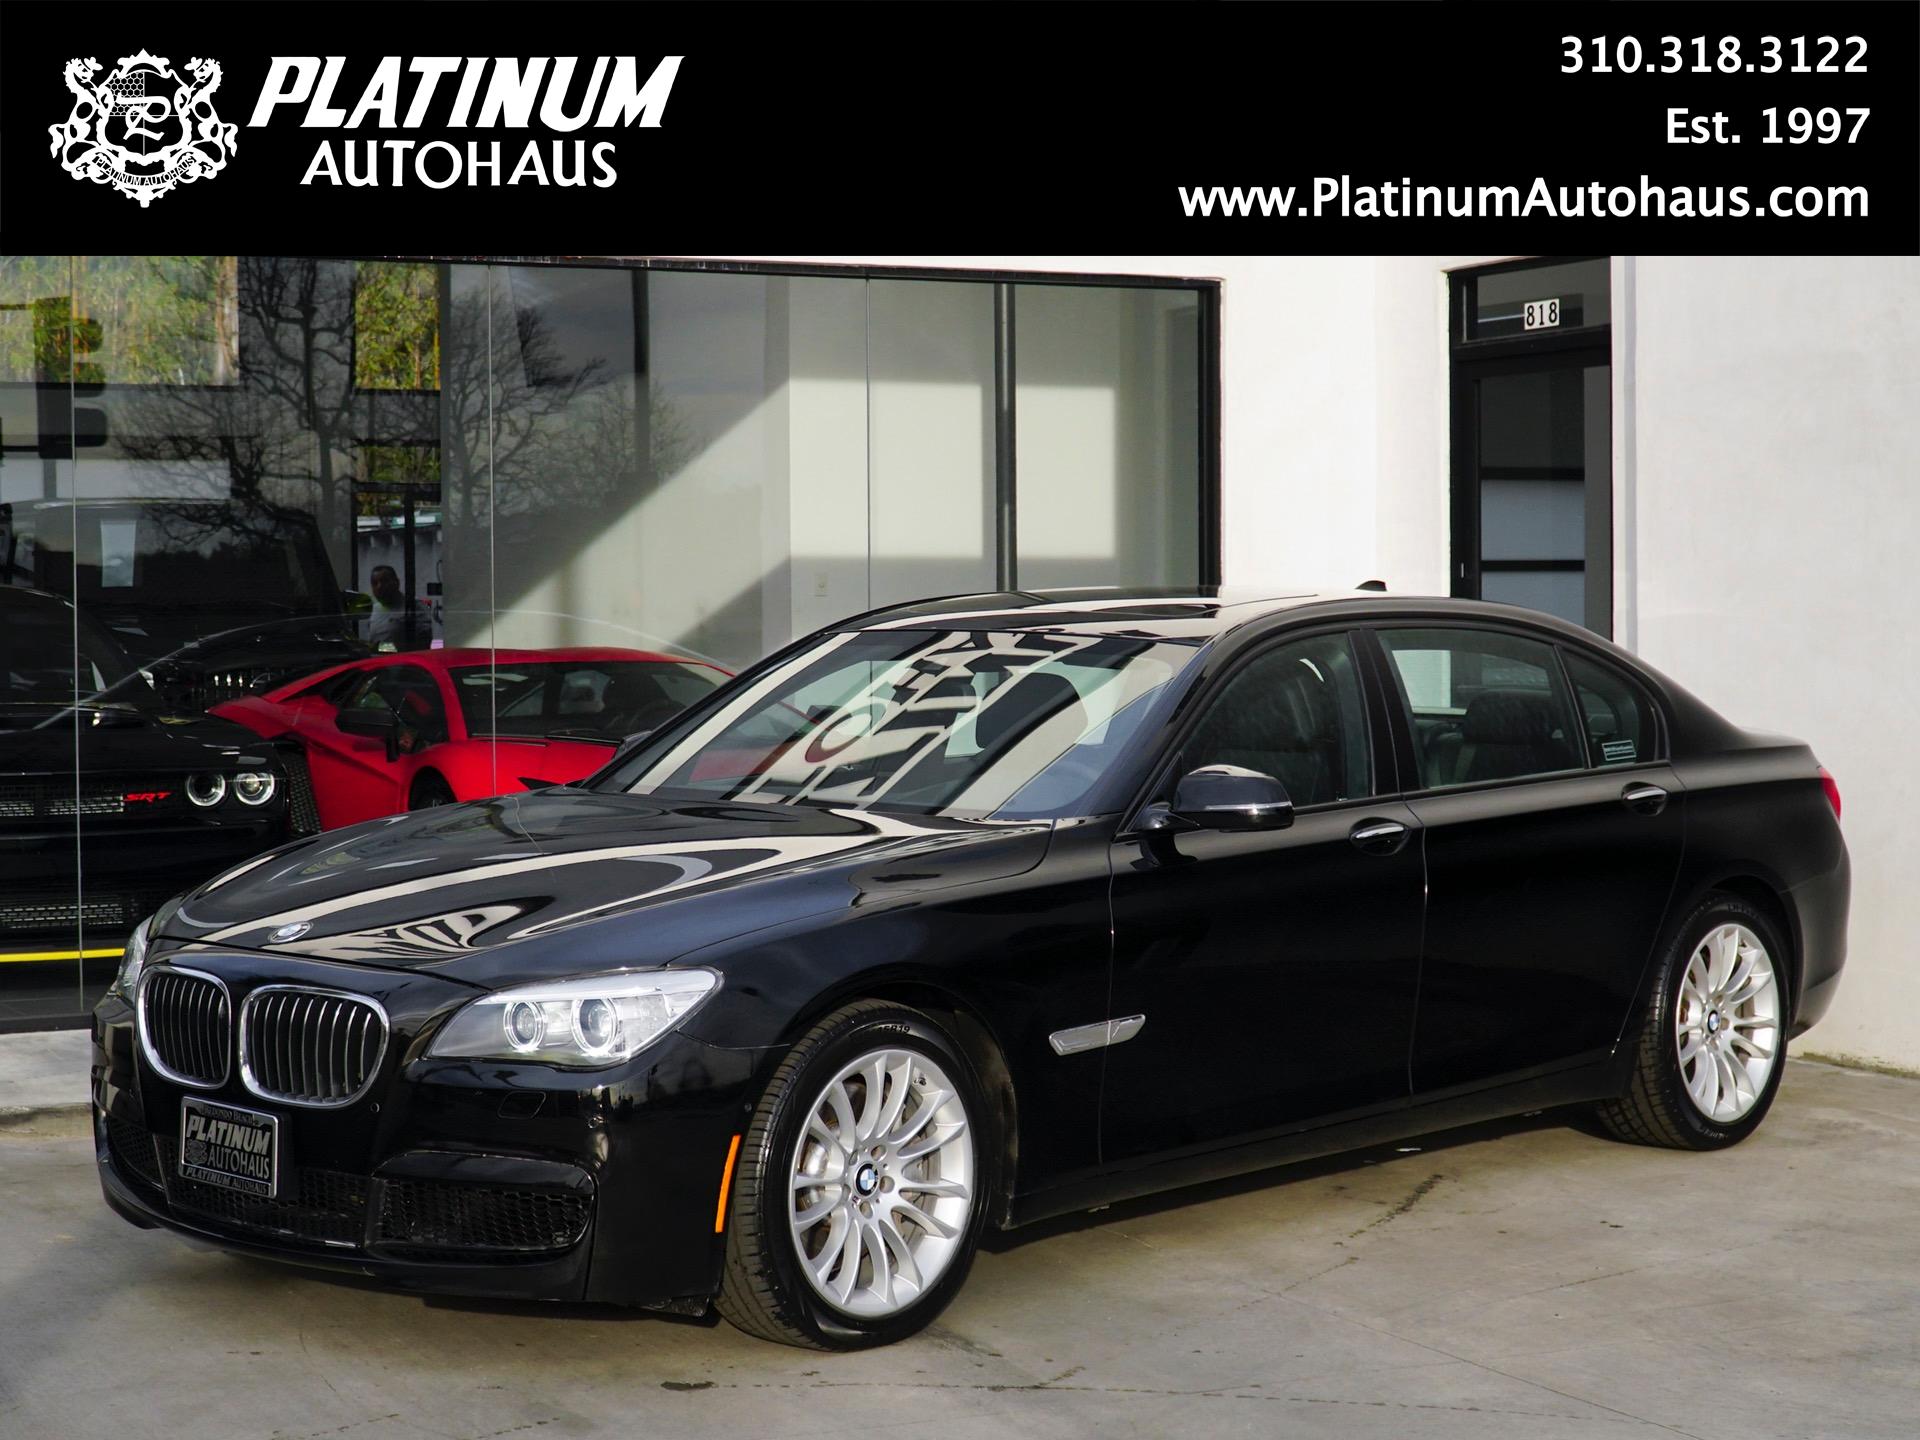 Used BMW 7 Series for Sale Near Me | Edmunds